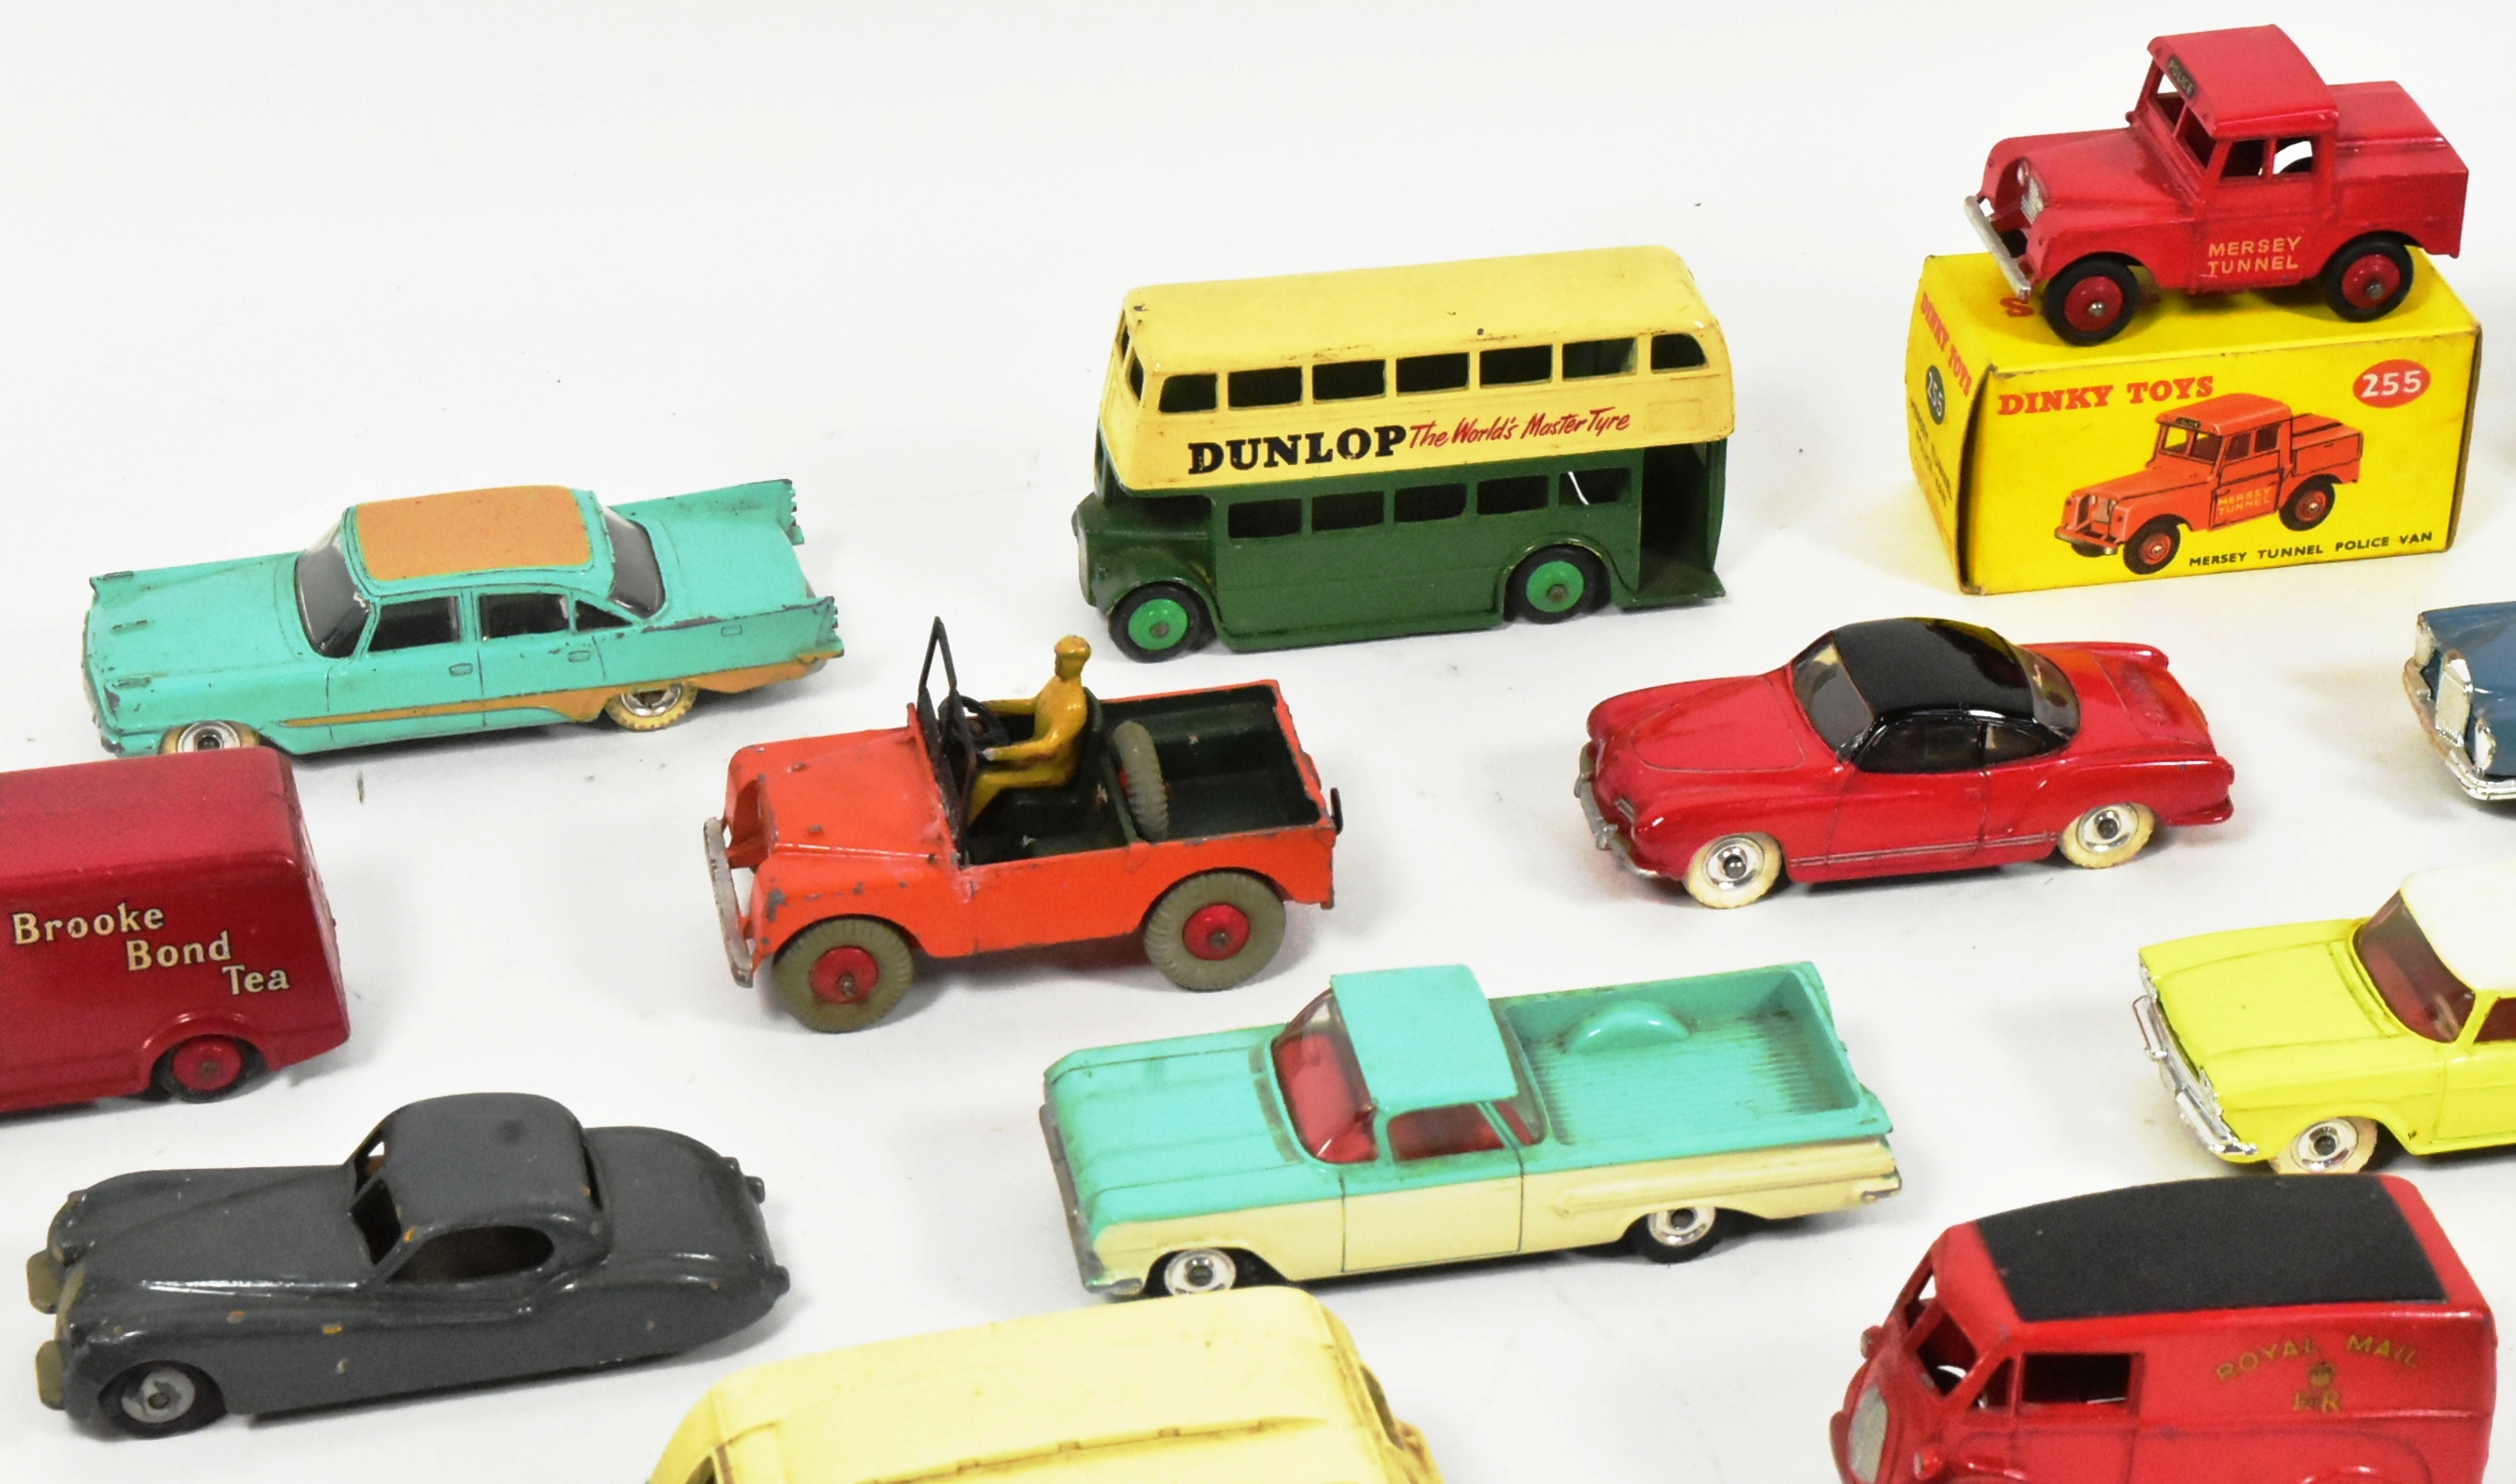 DIECAST - COLLECTION OF VINTAGE DINKY TOYS DIECAST MODELS - Image 3 of 6